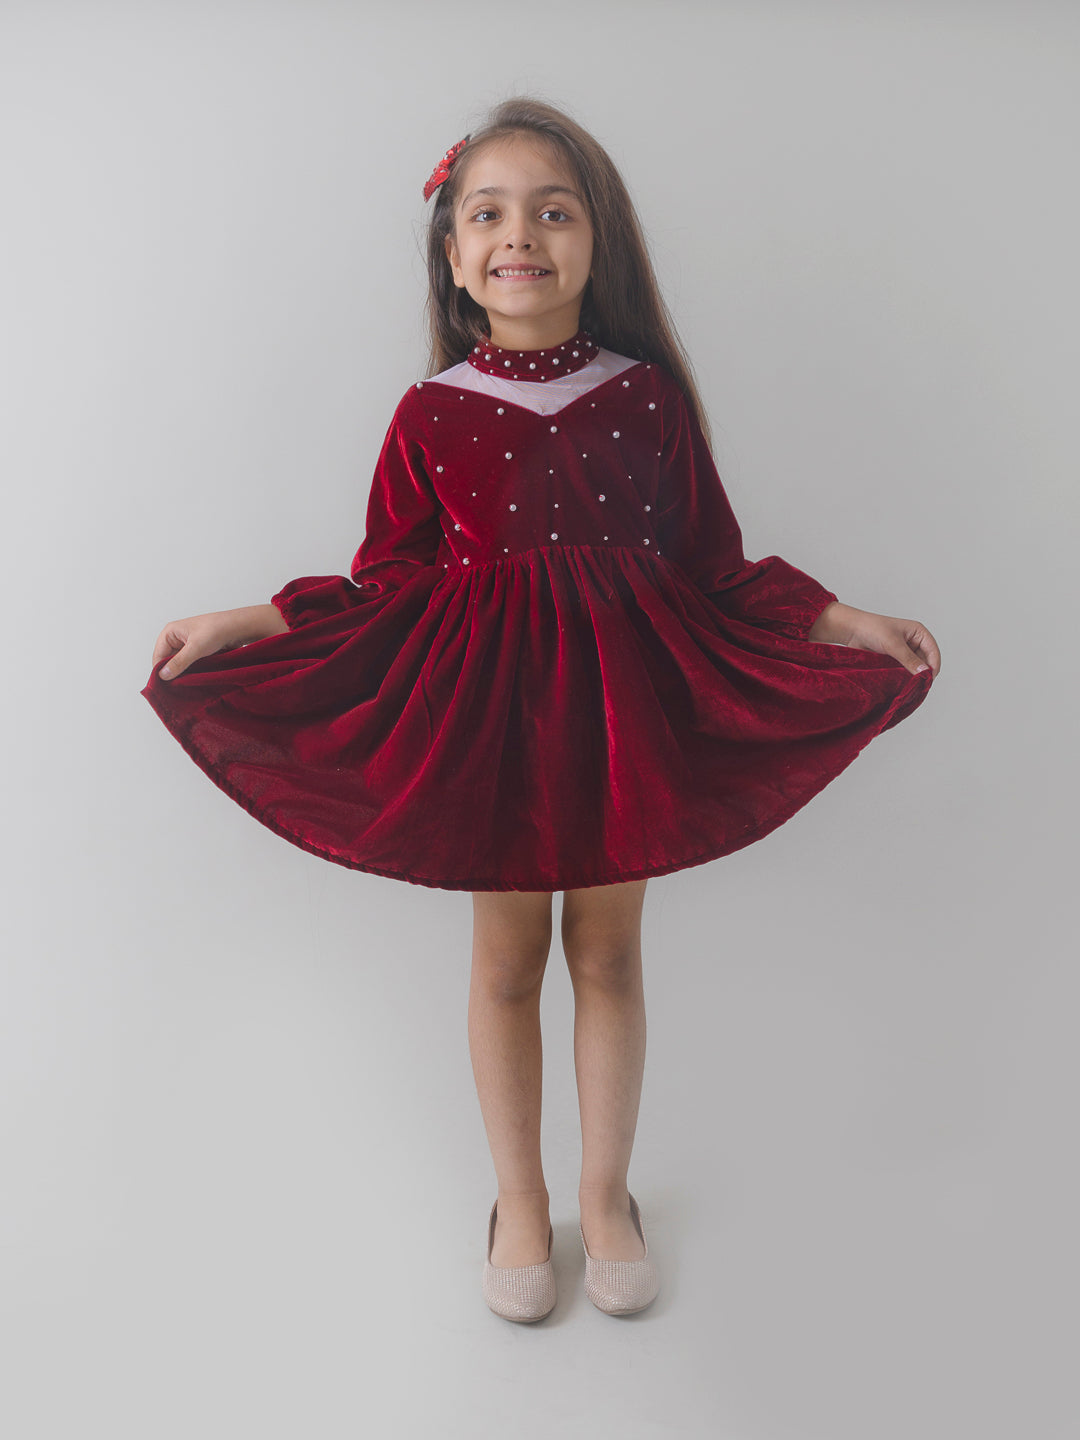 Marron Velvet Party Dress with Embellished Pearls